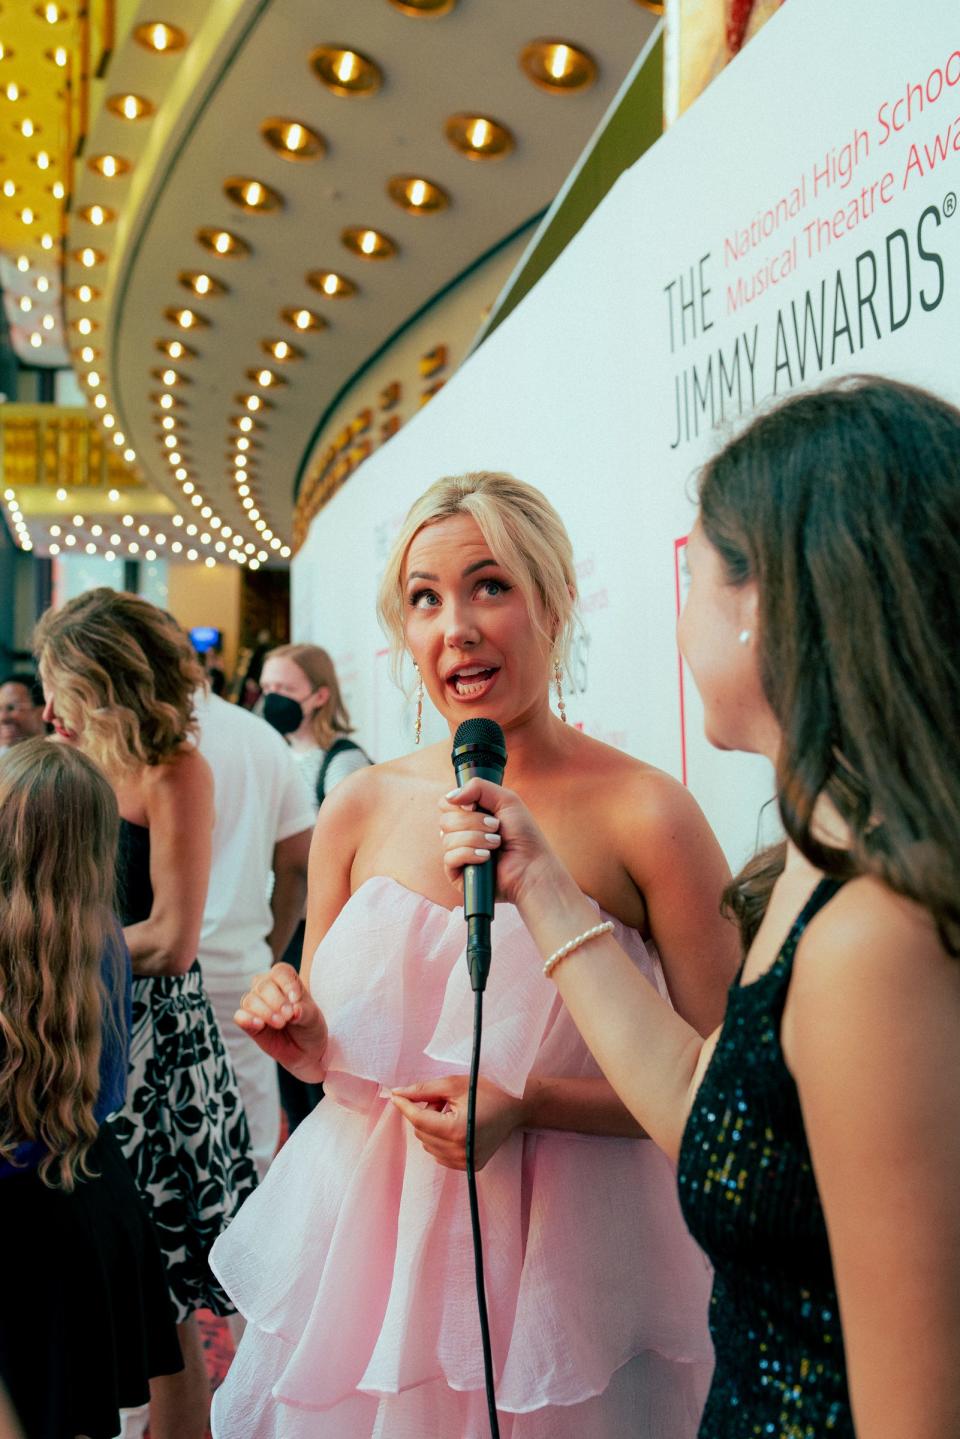 JD Davis, a recent graduate of Harrison School for the Arts, captured this image of a fellow student reporter interviewing actor McKenzie Kurtz, who plays Glinda in “Wicked” on Broadway. Davis was one of two student reporters selected to cover the event.